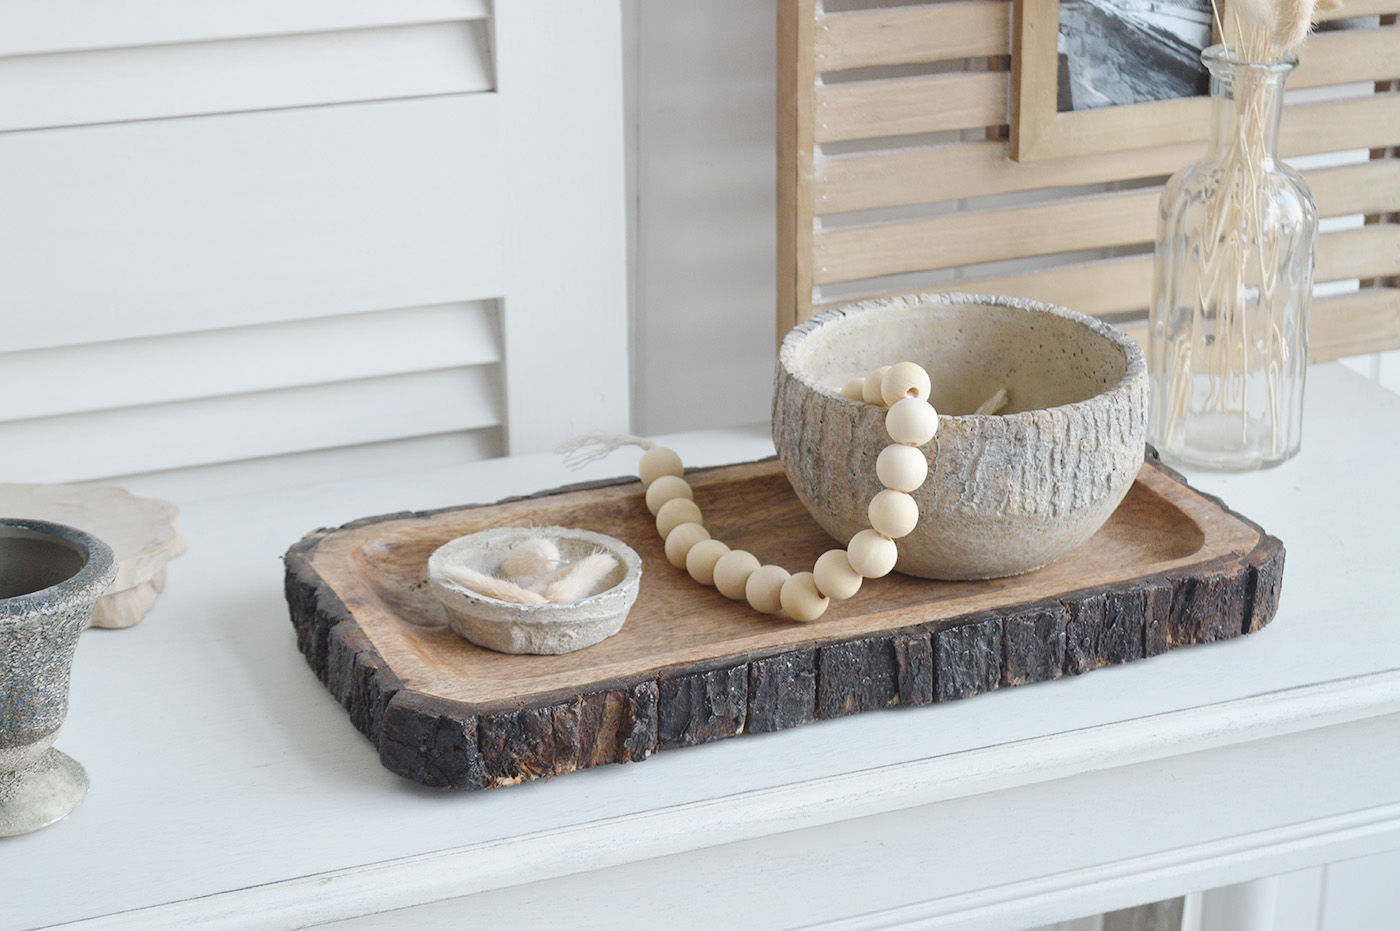 The White Lighthouse. White Furniture and accessories for the home. Natural wooden tree trunk trays for New England interiors for coastal, country, and modern farmhouse homes for coffee table and console table styling